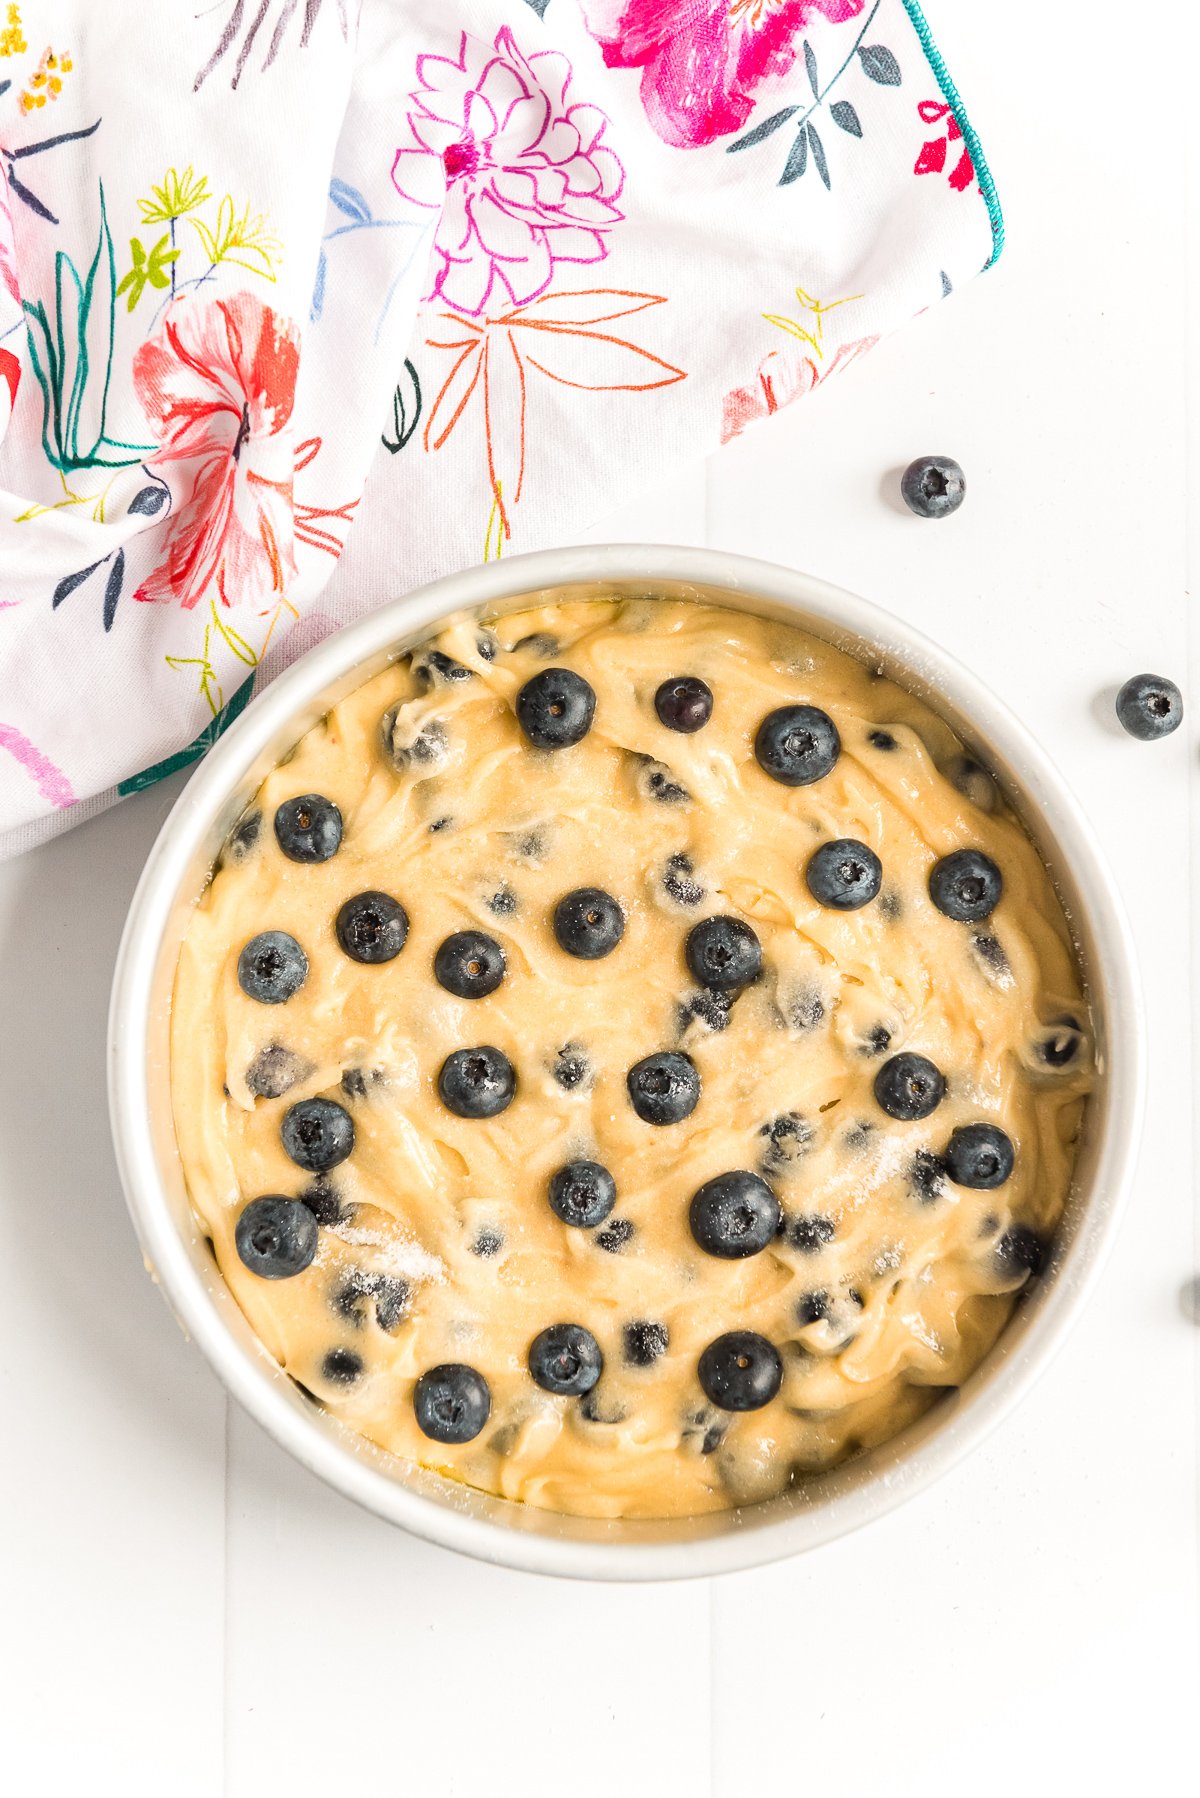 Blueberry cake batter in a round cake pan with a colorful floral napkin next to it.